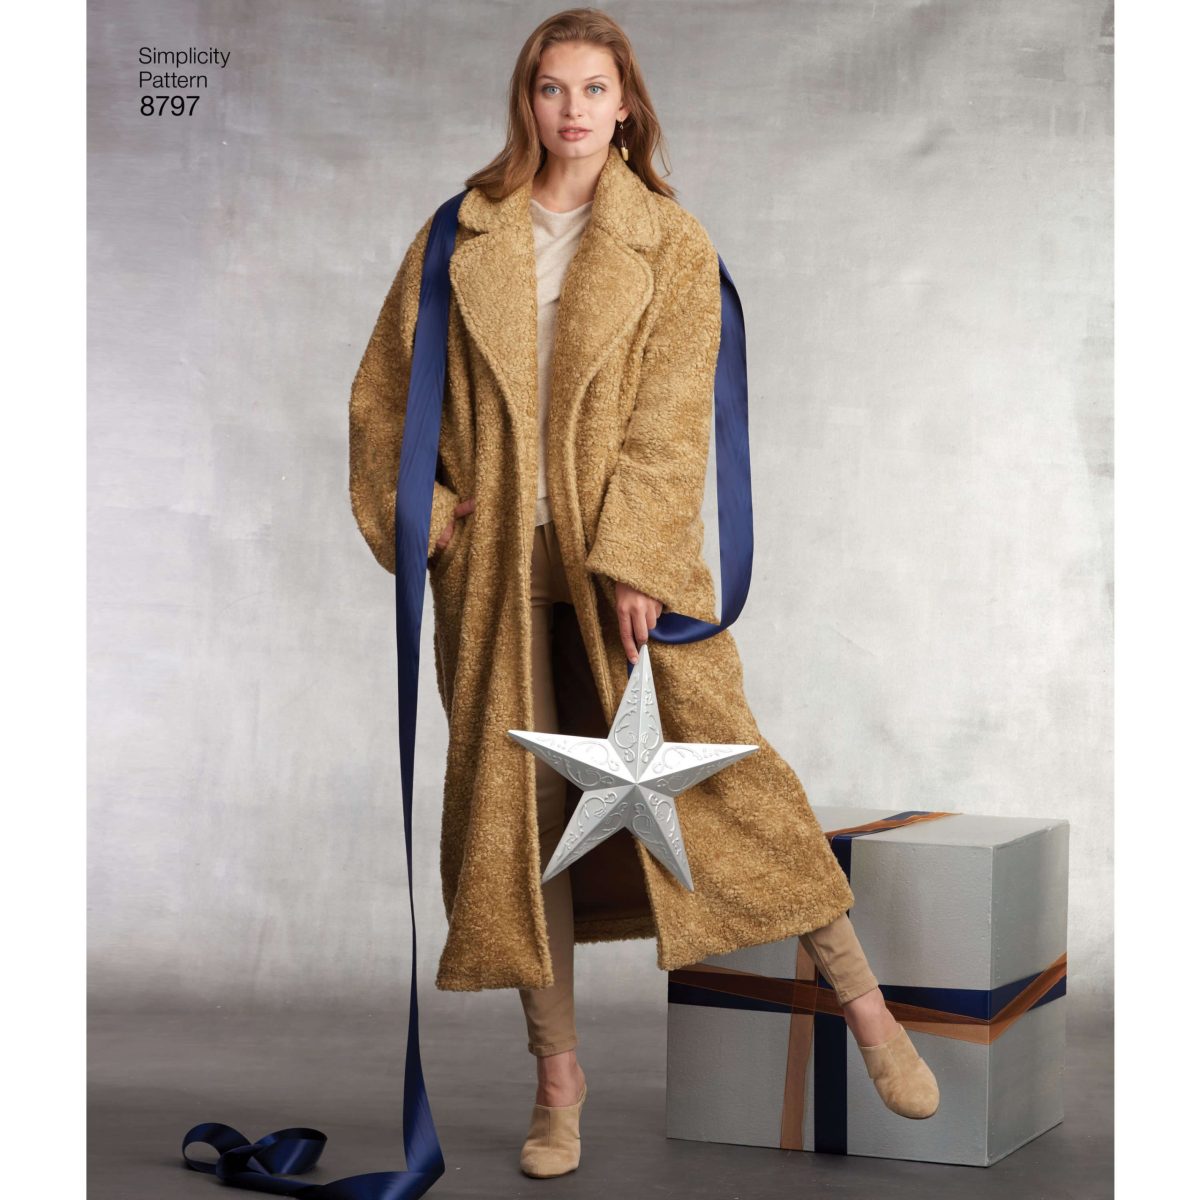 Simplicity Sewing Pattern 8797 Misses Loose Fitting Lined Coat